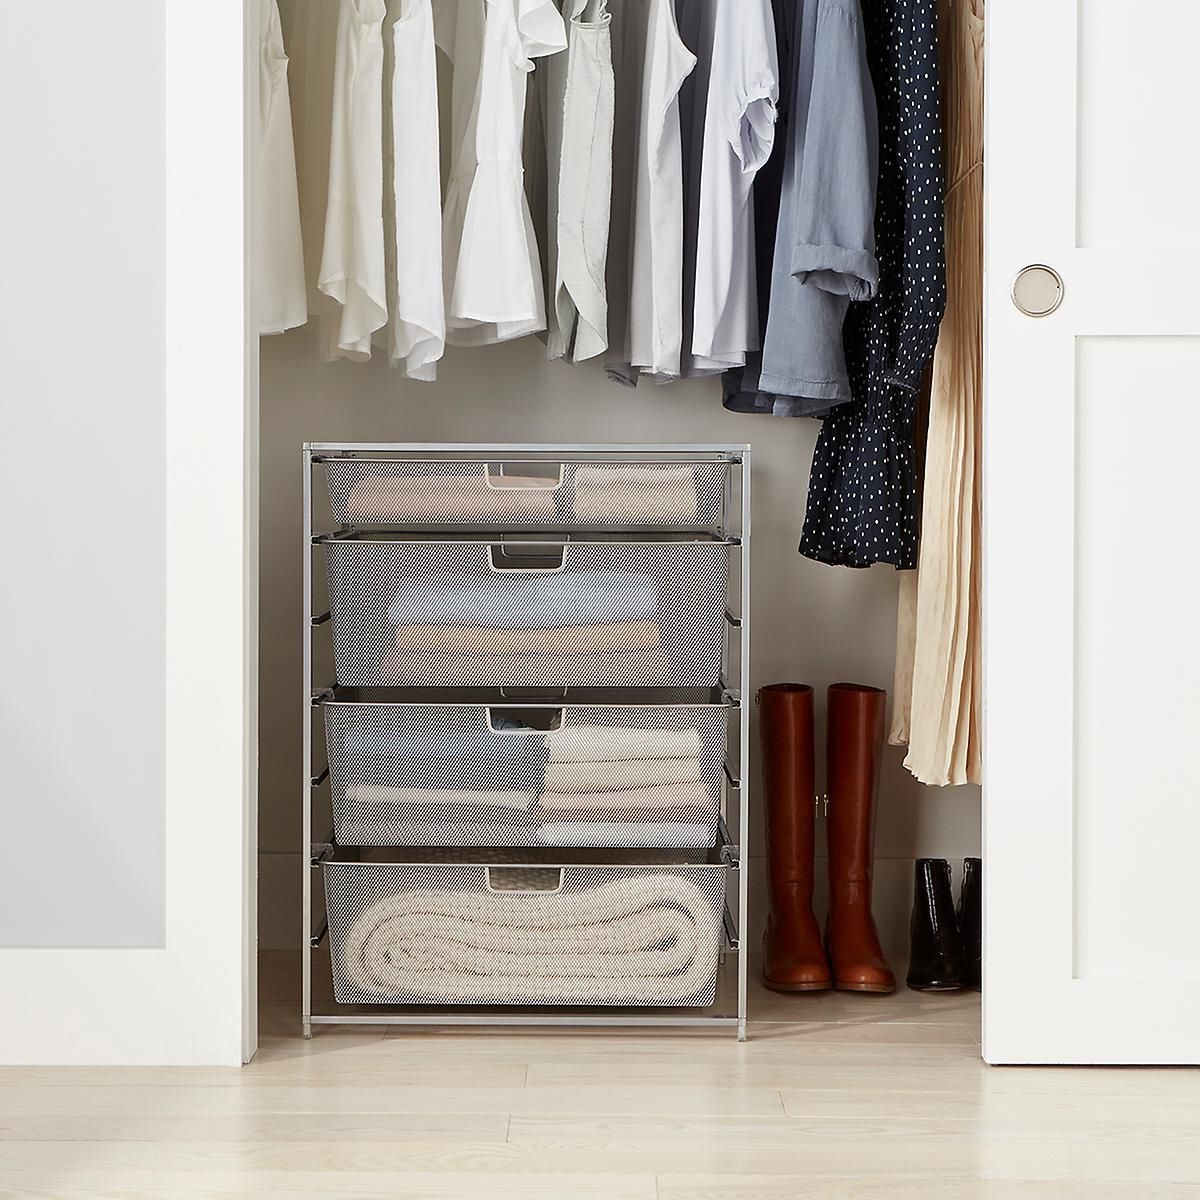 How To Organize Closet Without Shelves 1709293322 